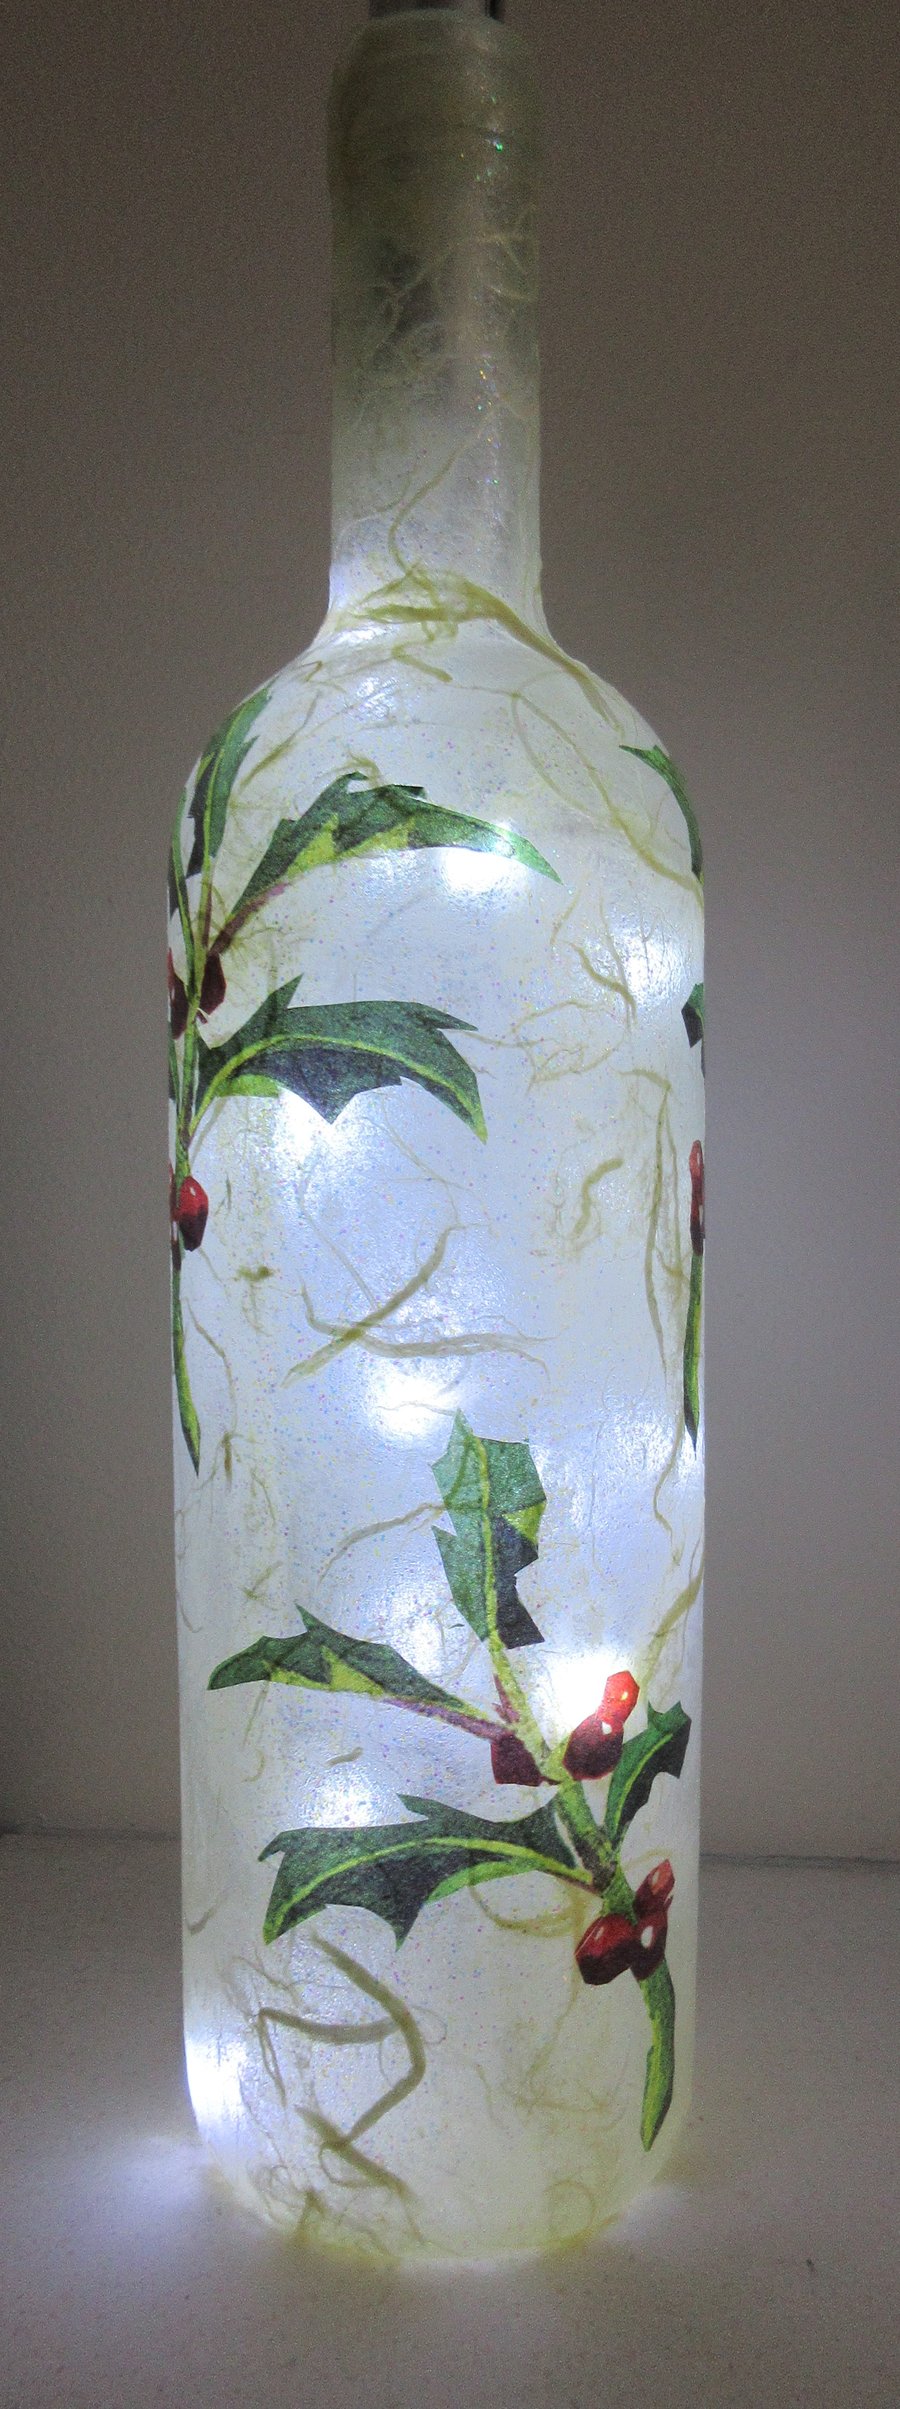 SOLD - Bottle with Emma Bridgewater Holly tissue decoupage - vase or lights